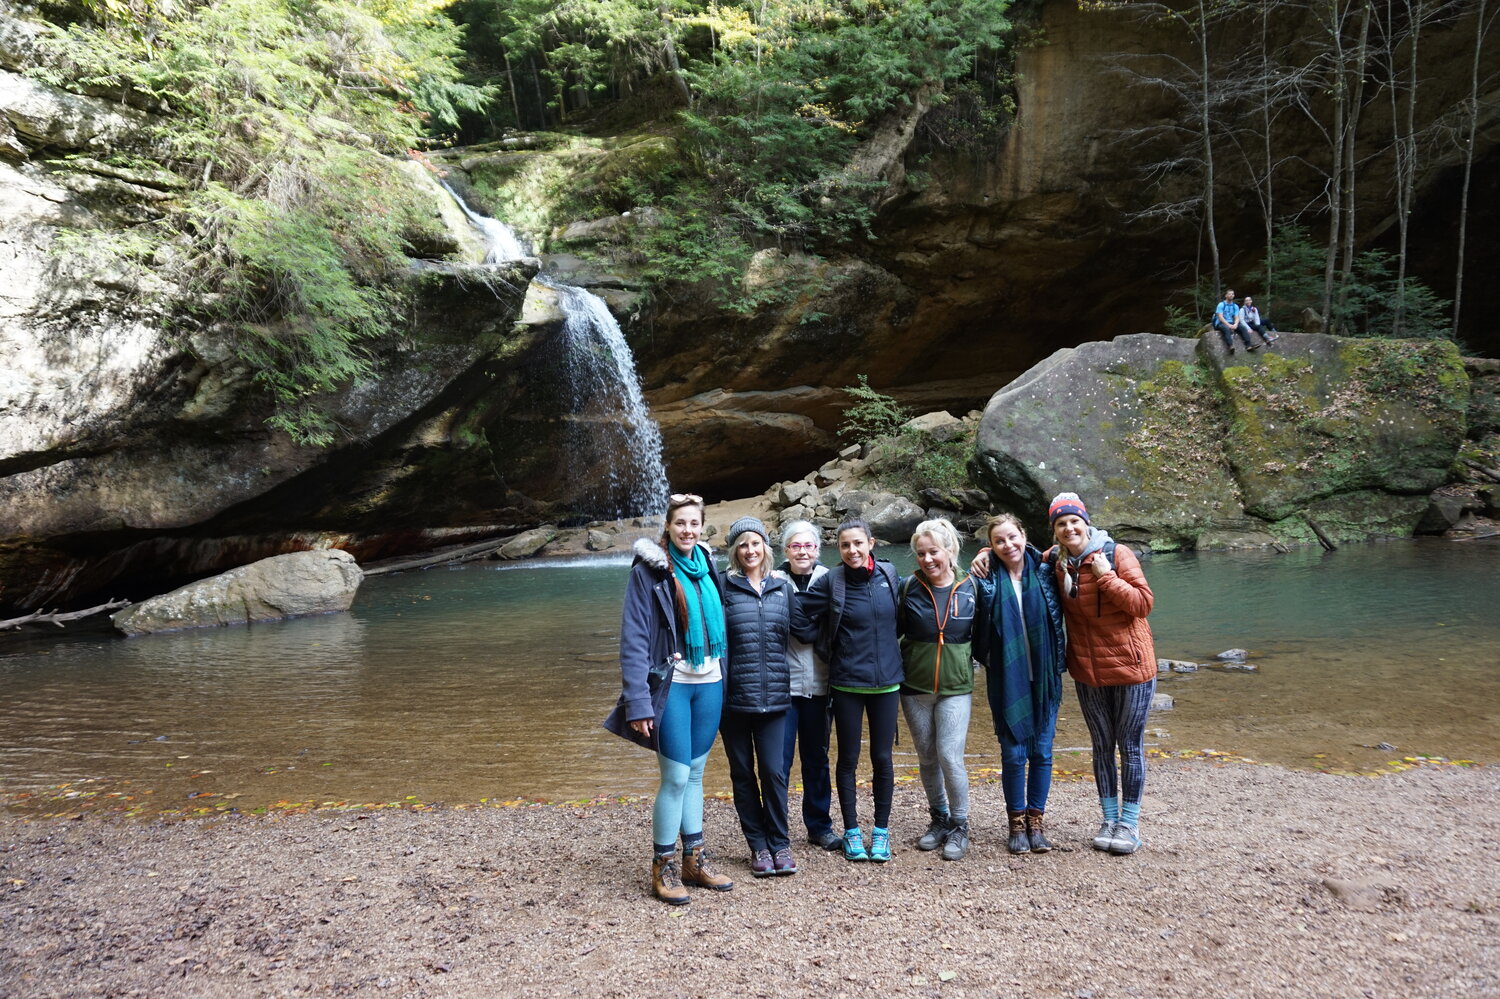 group in front of water fall